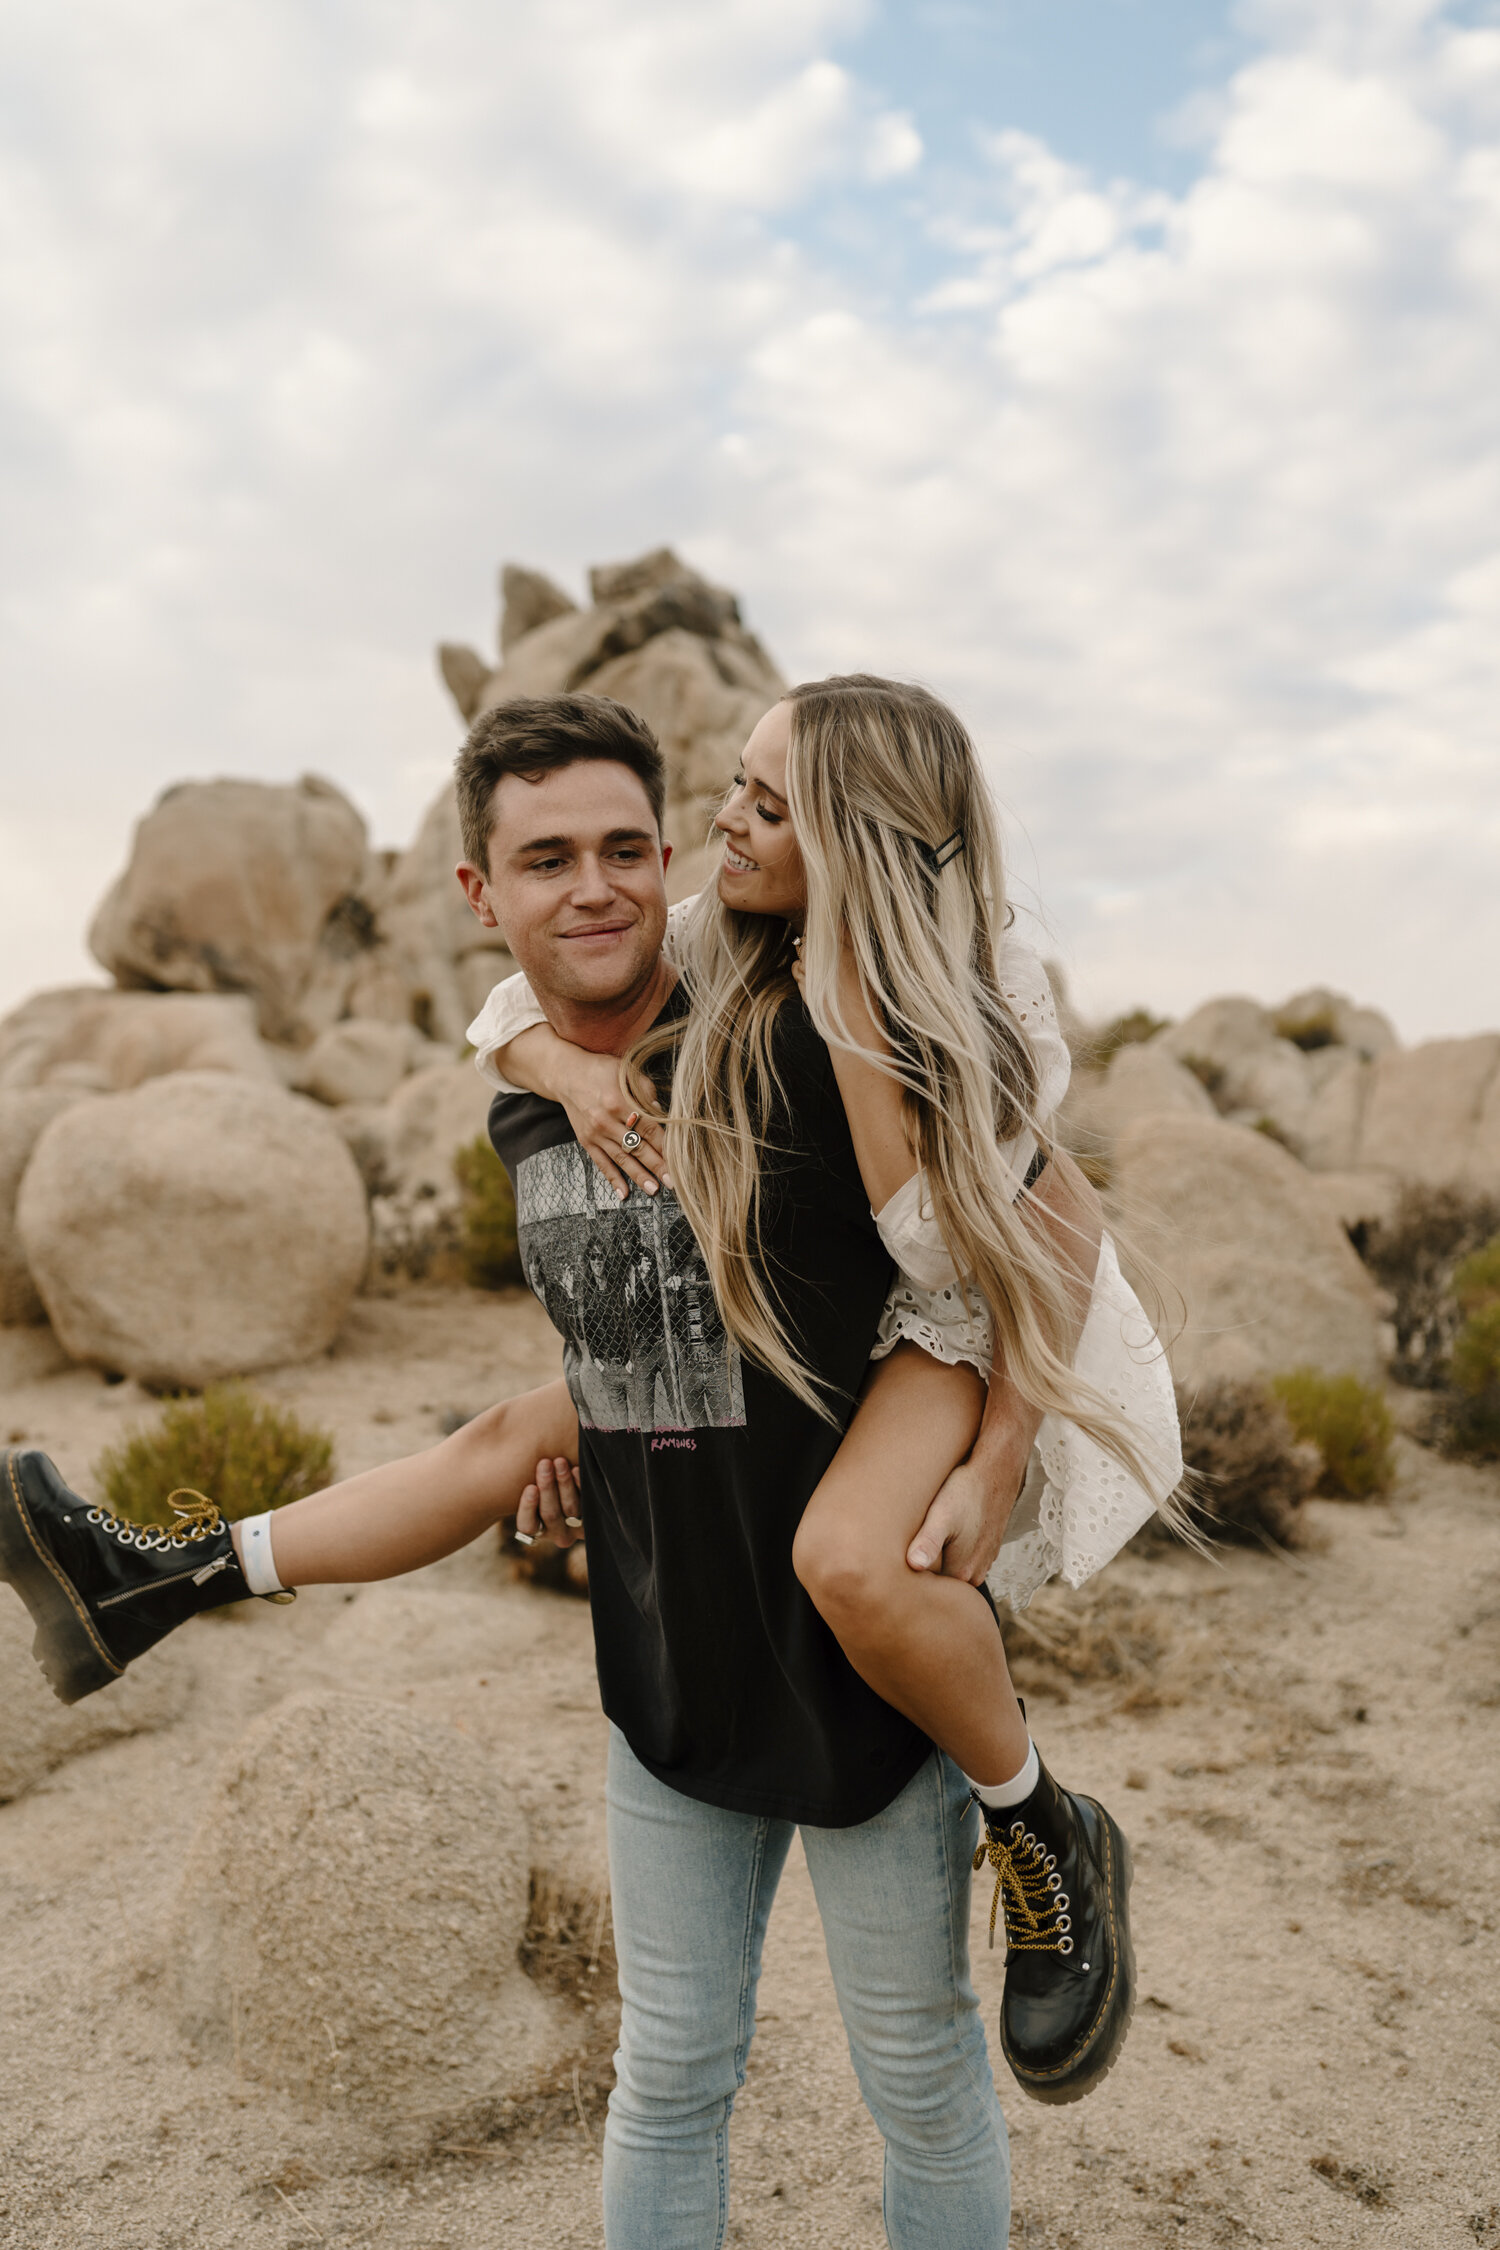 Wild and fun couple engagement session in Joshua Tree, California | by Kayli LaFon Photography